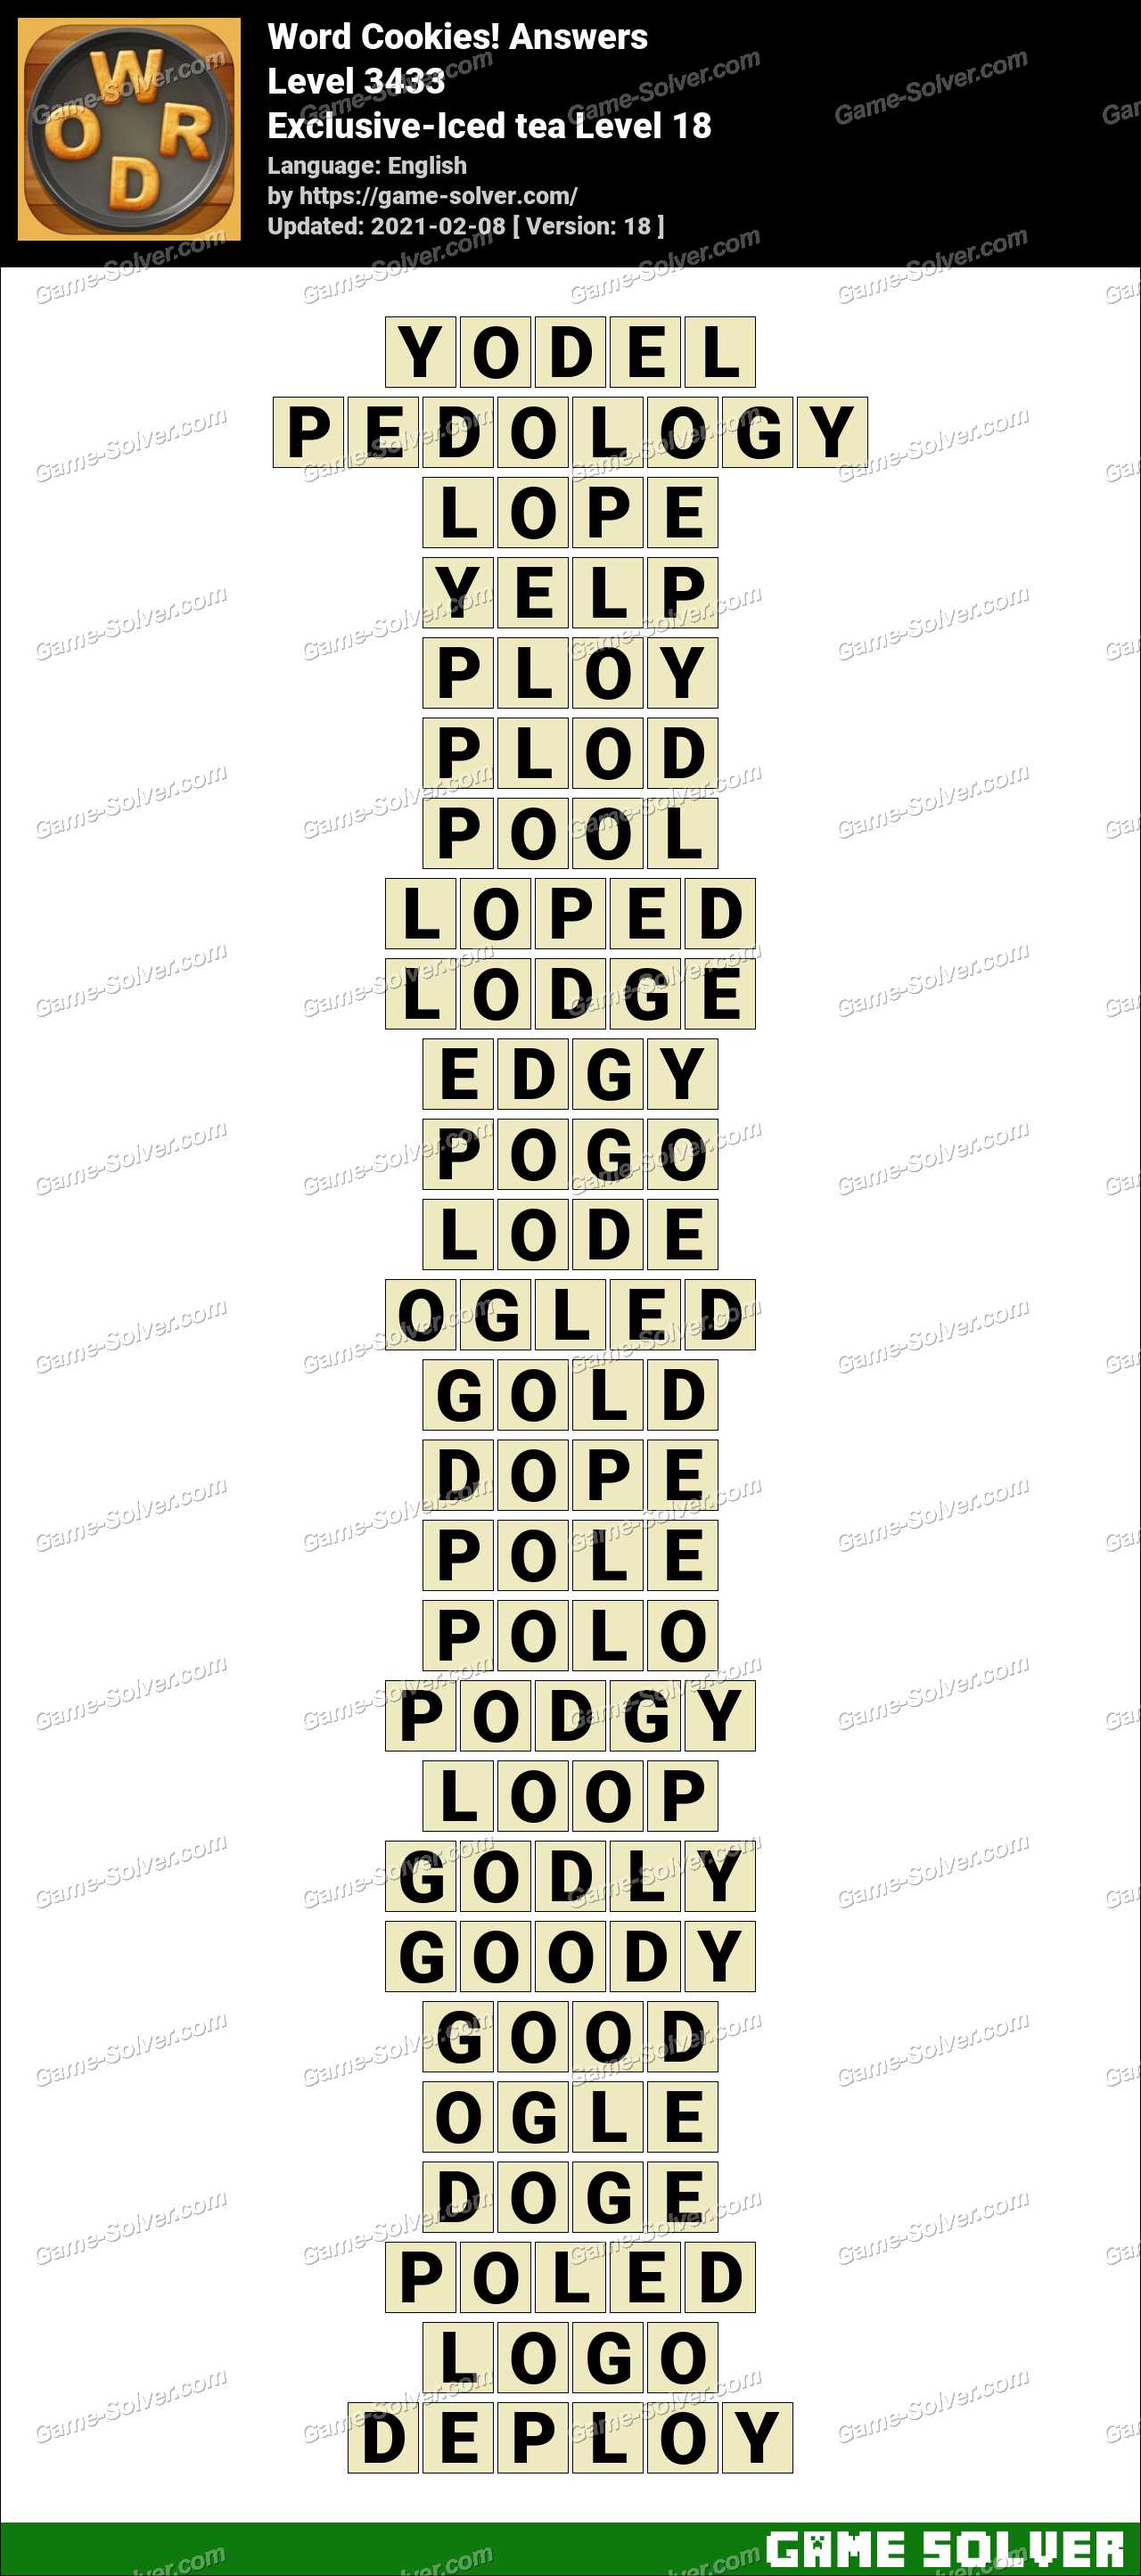 Word Cookies Exclusive-Iced tea Level 18 Answers